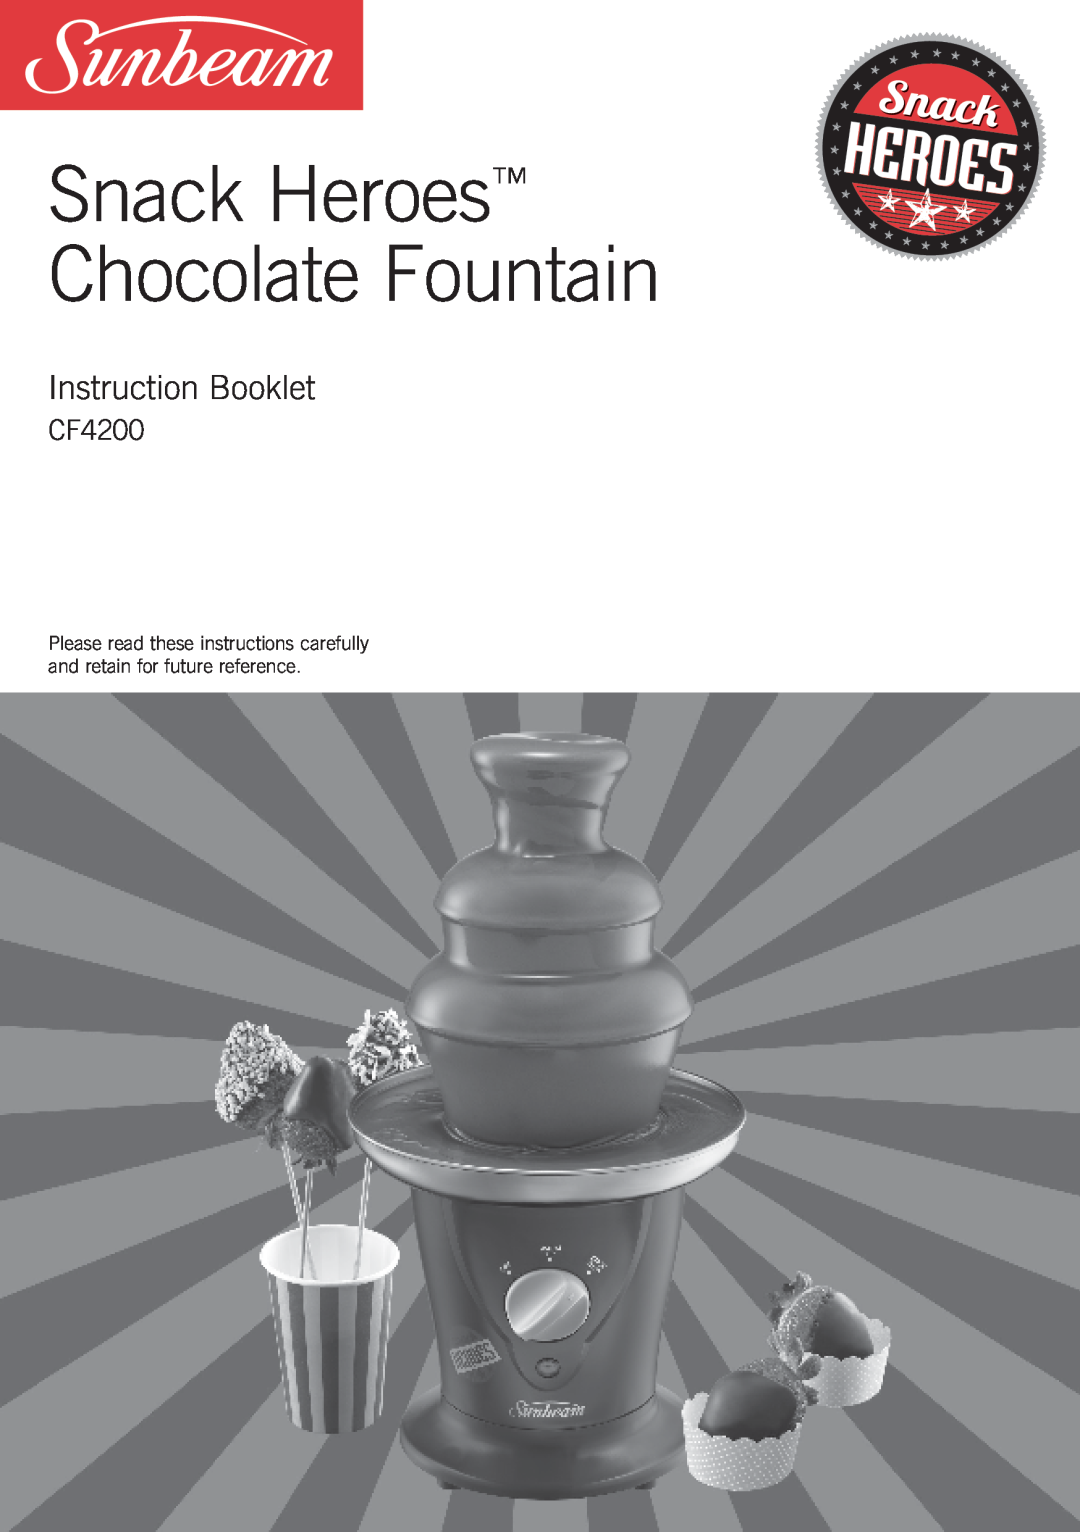 Sunbeam CF4200 manual Snack Heroes Chocolate Fountain, Instruction Booklet 